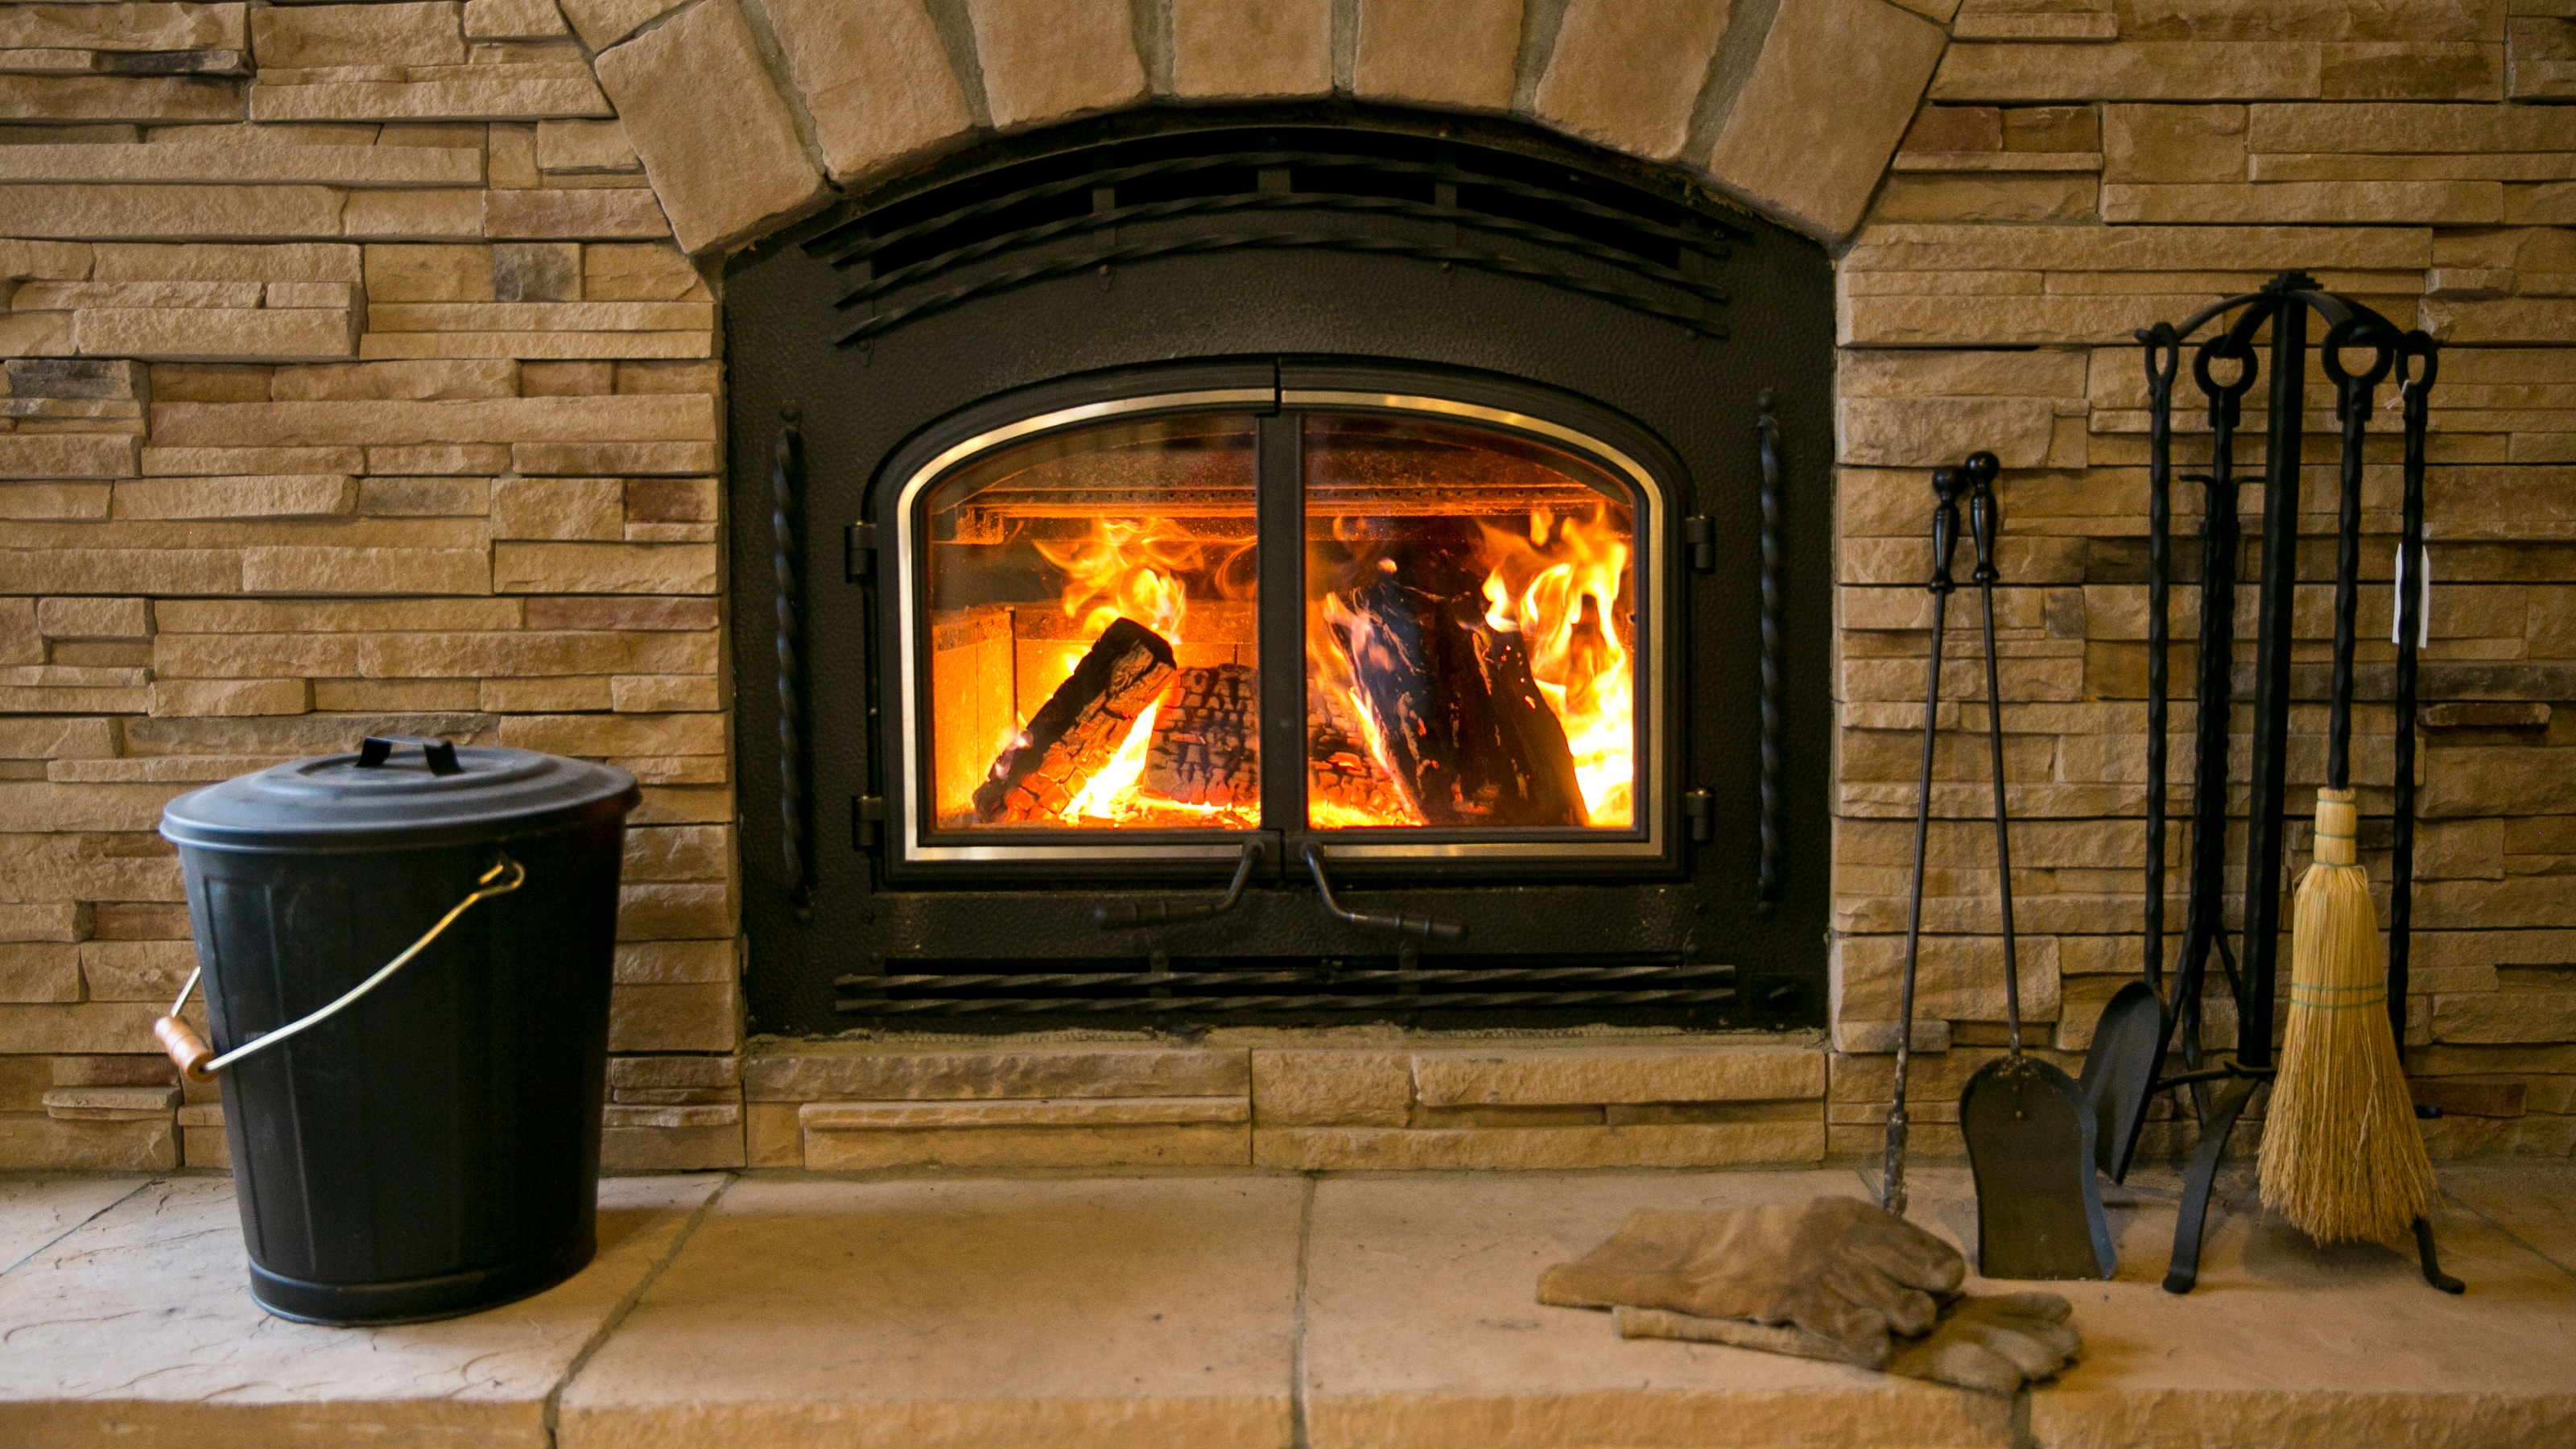 Fireplace Store San Antonio Beautiful How to Convert A Gas Fireplace to Wood Burning